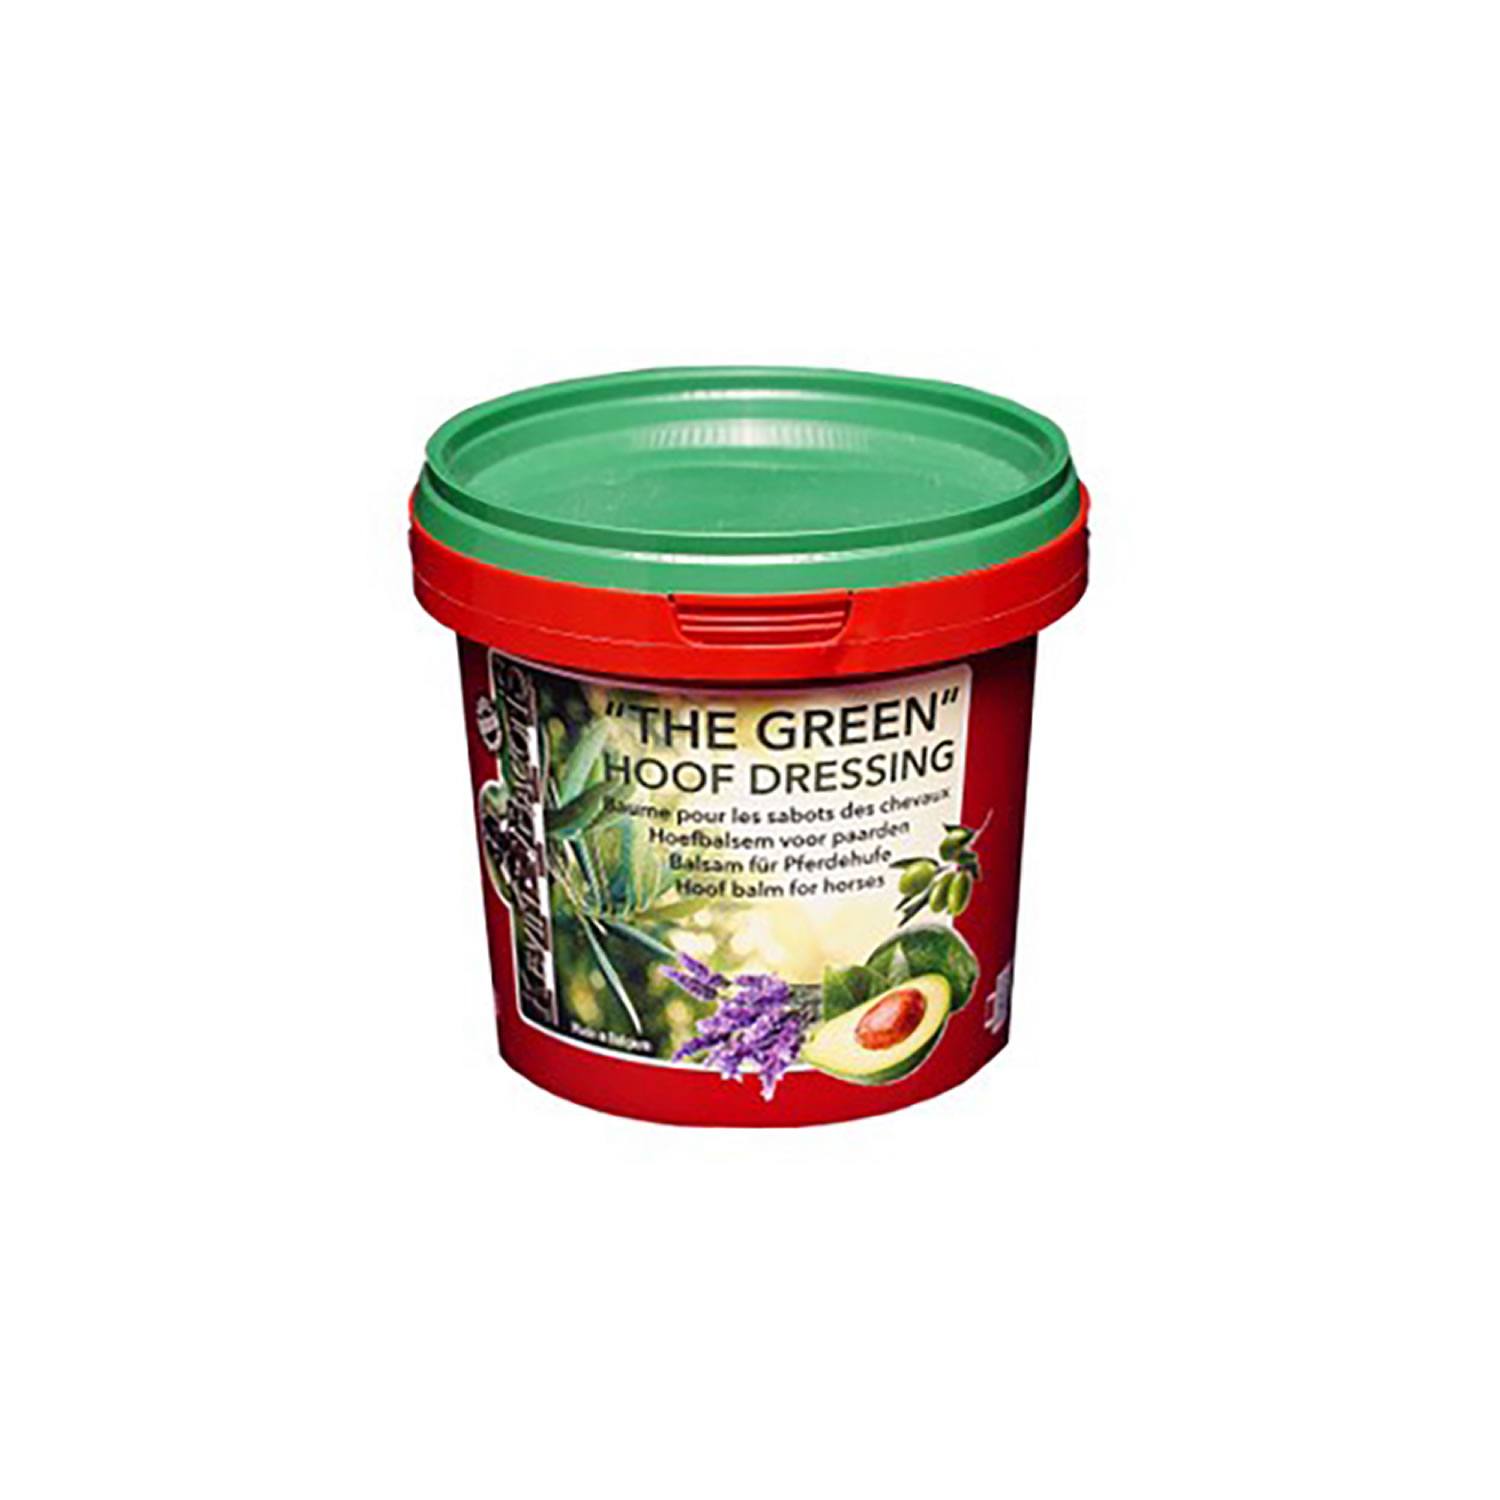 Kevin Bacon The Green Hoof Dressing For Horses - 500ml